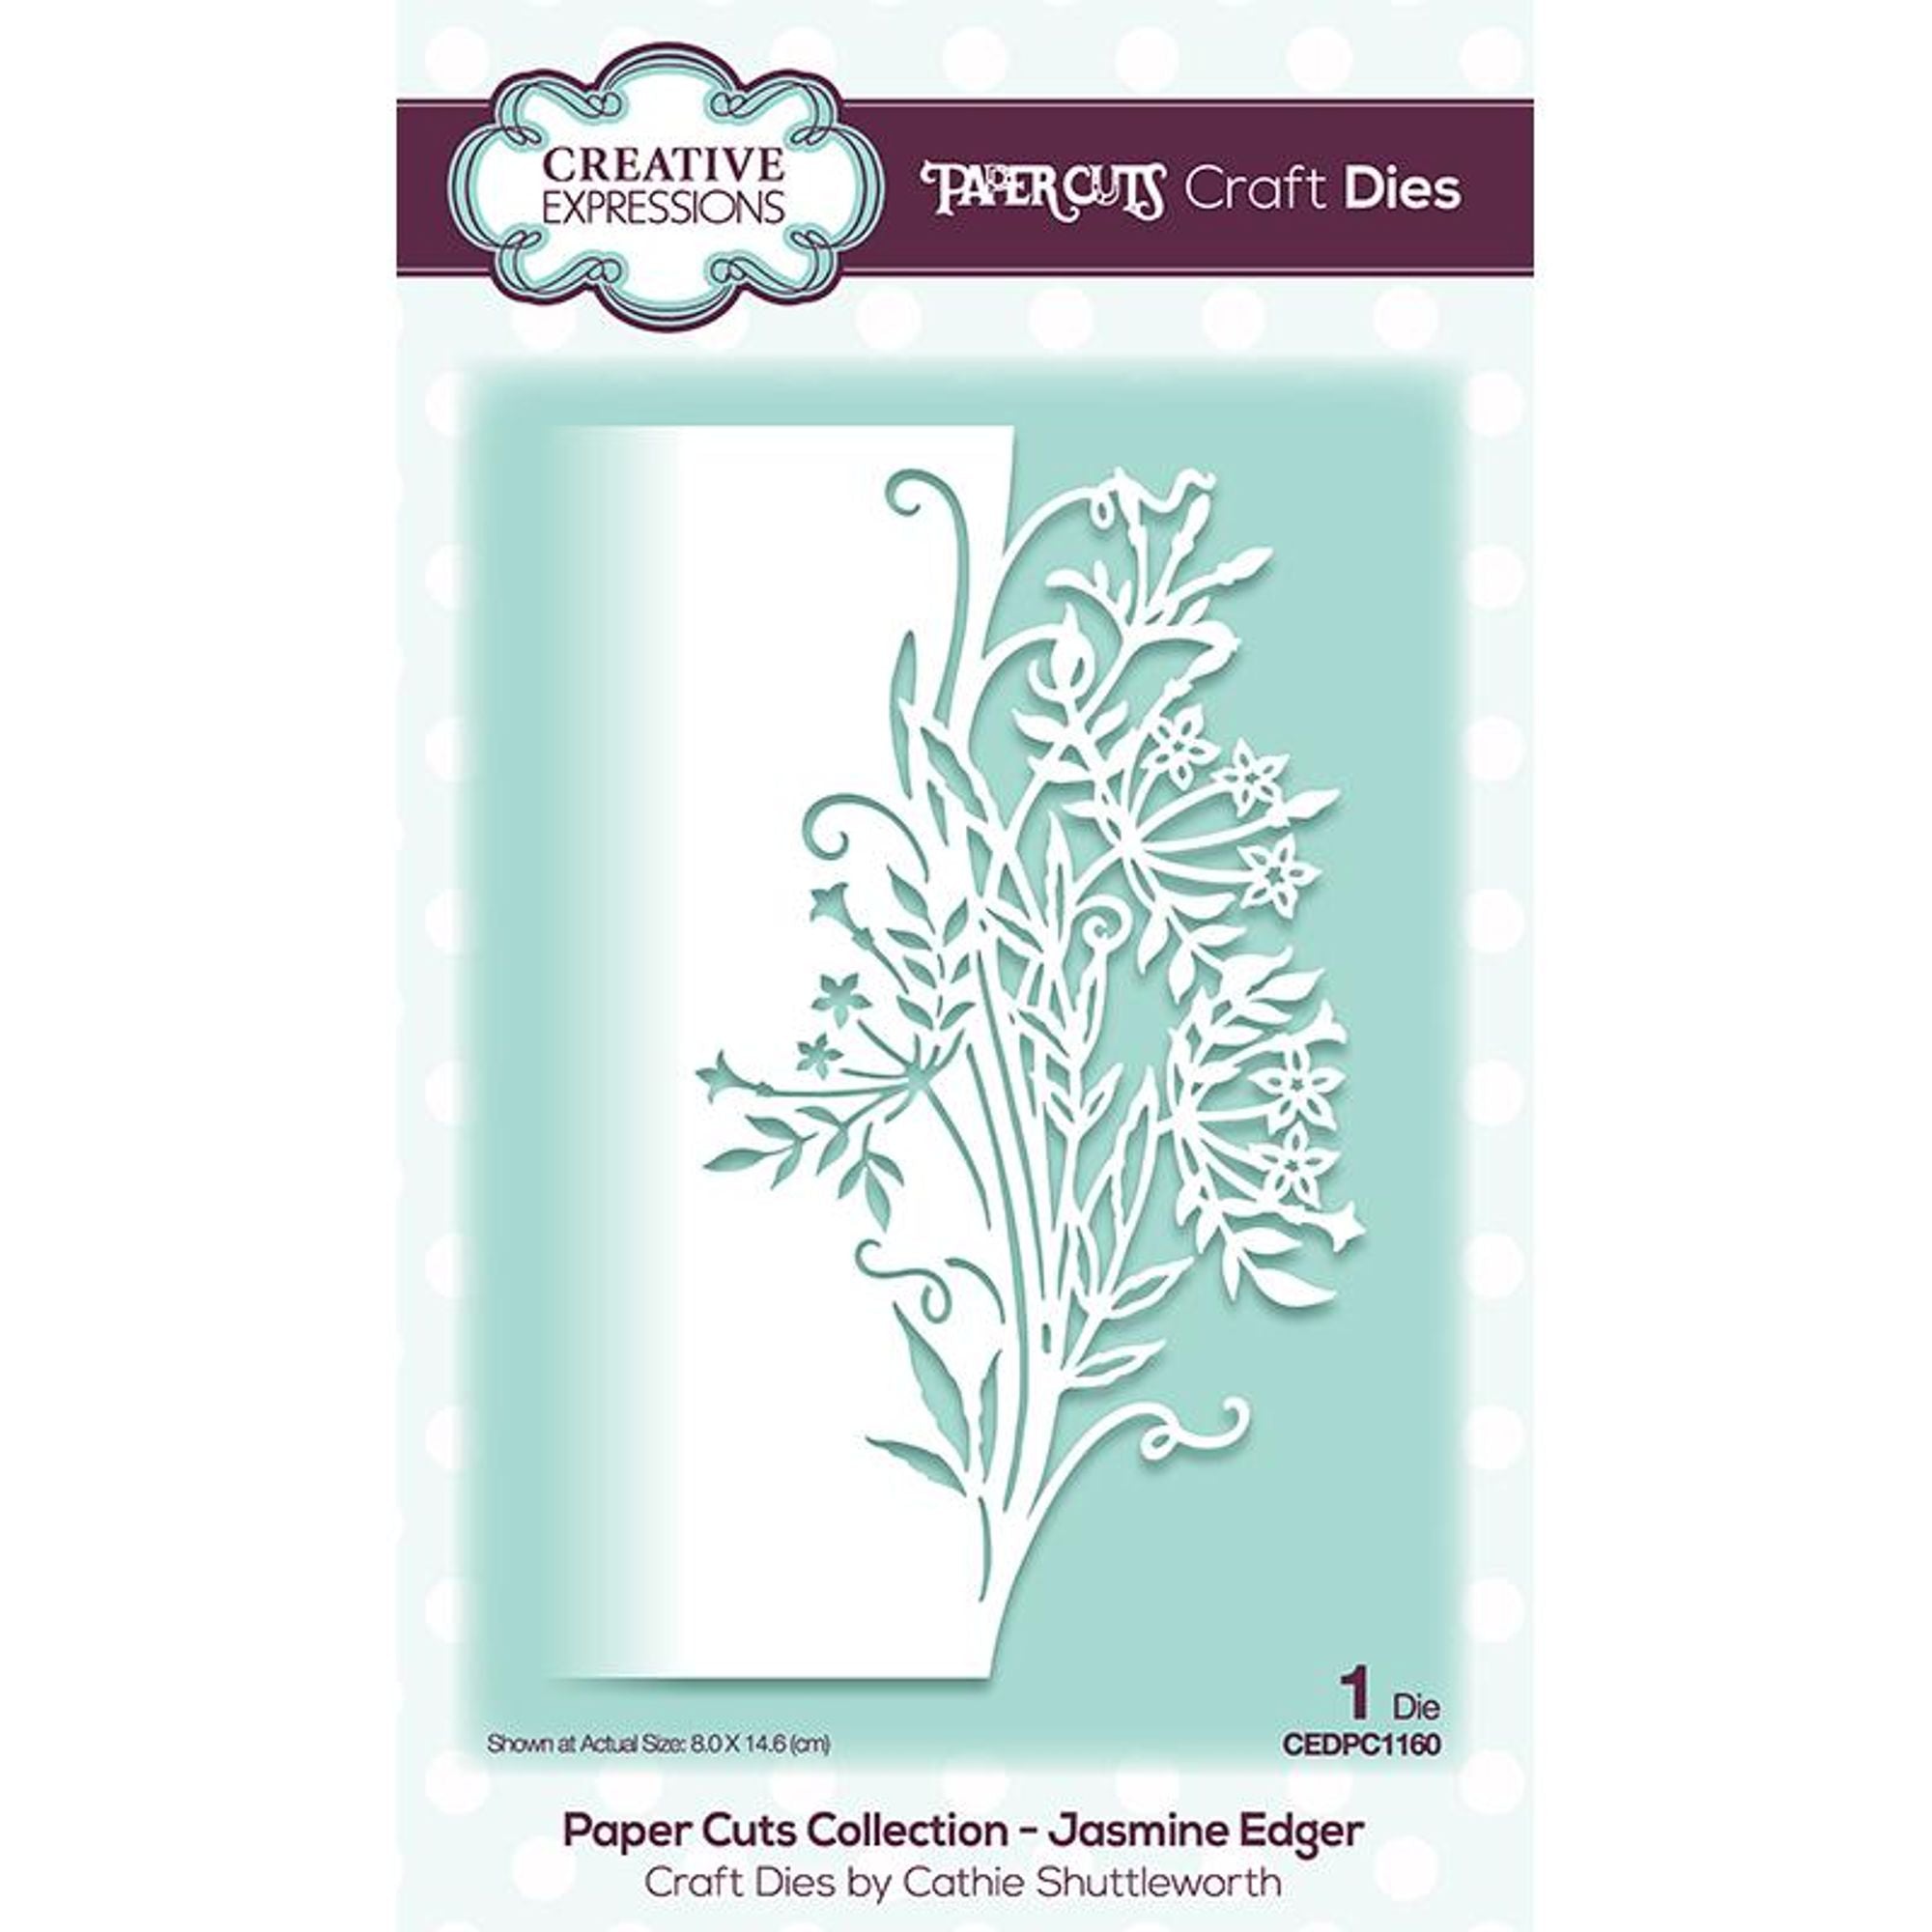 Creative Expressions Paper Cuts Corner Forget Me Not Craft Die